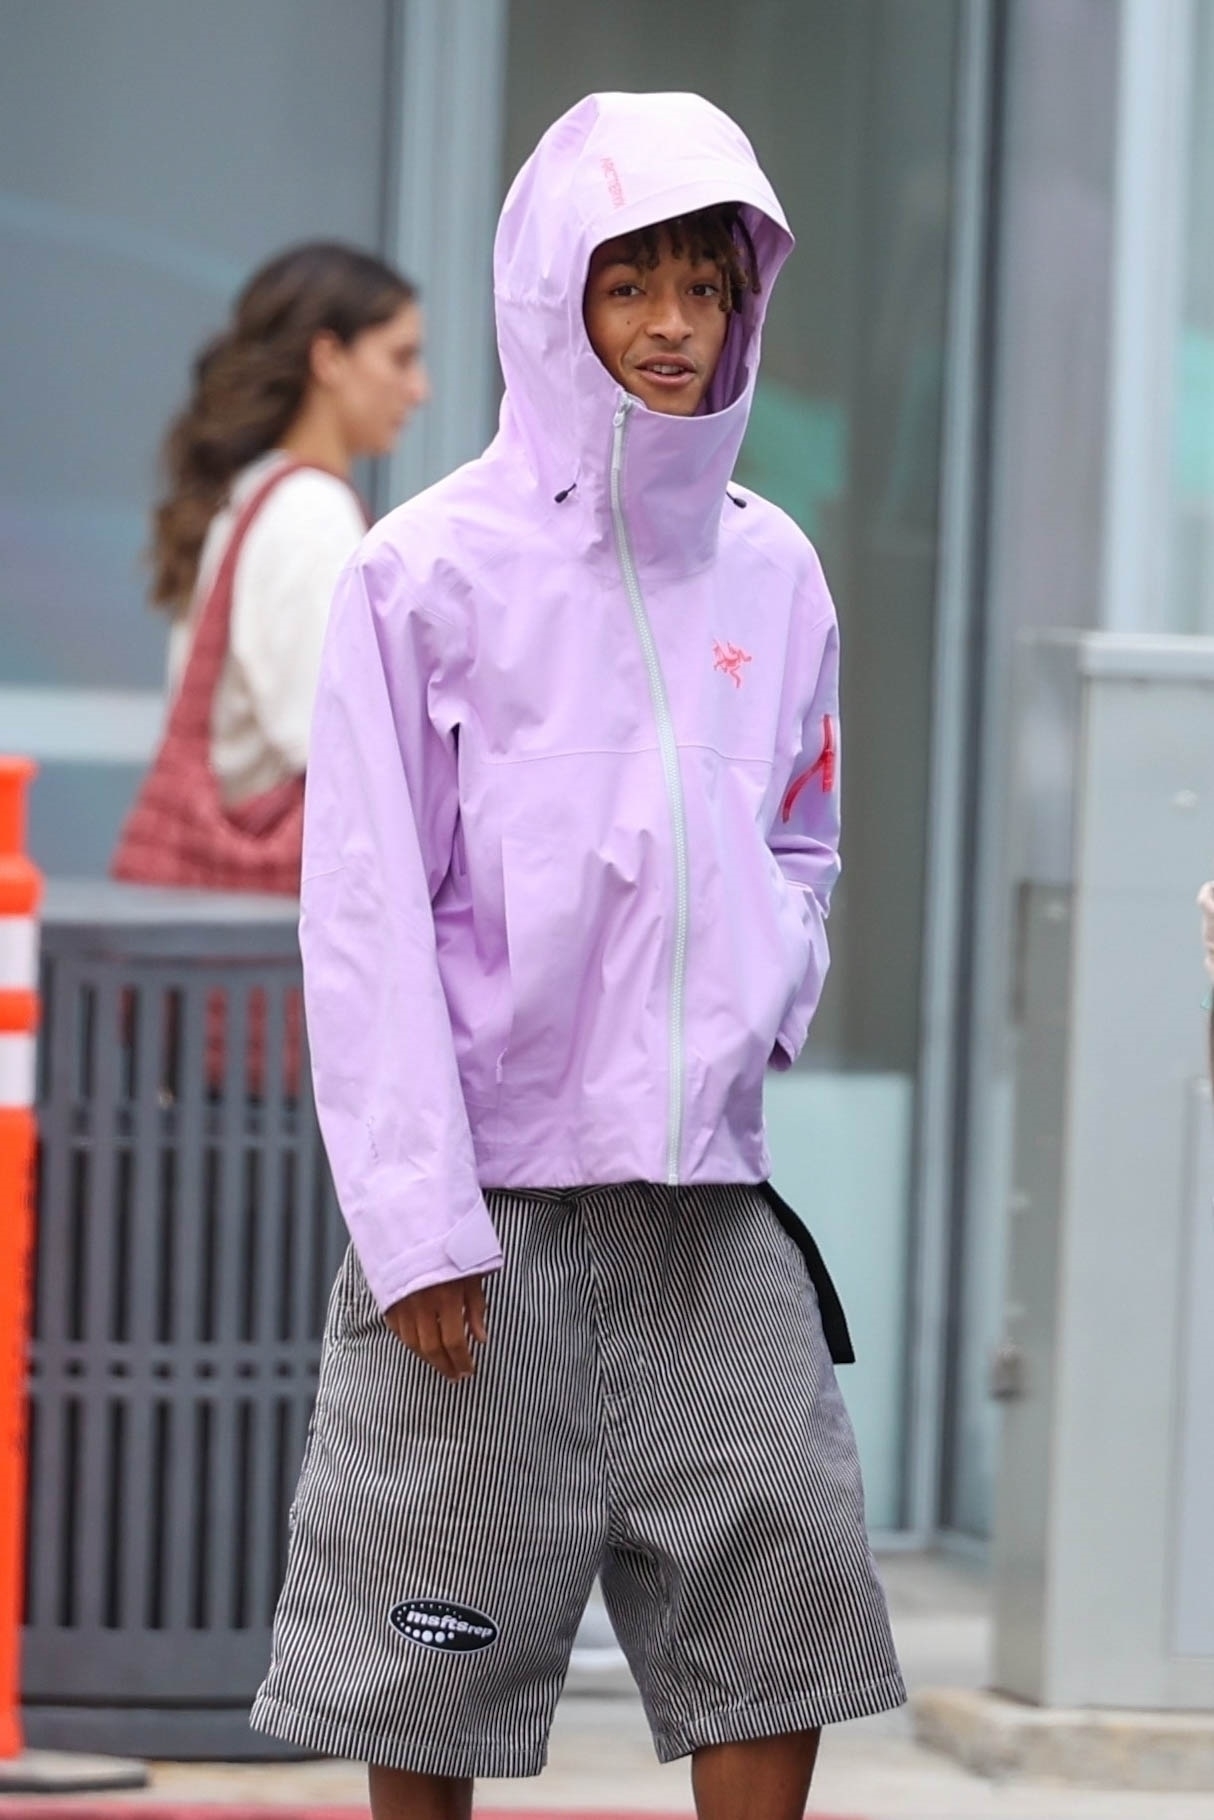 The actor sported a lavender jacket with gray shorts for the afternoon lunch date